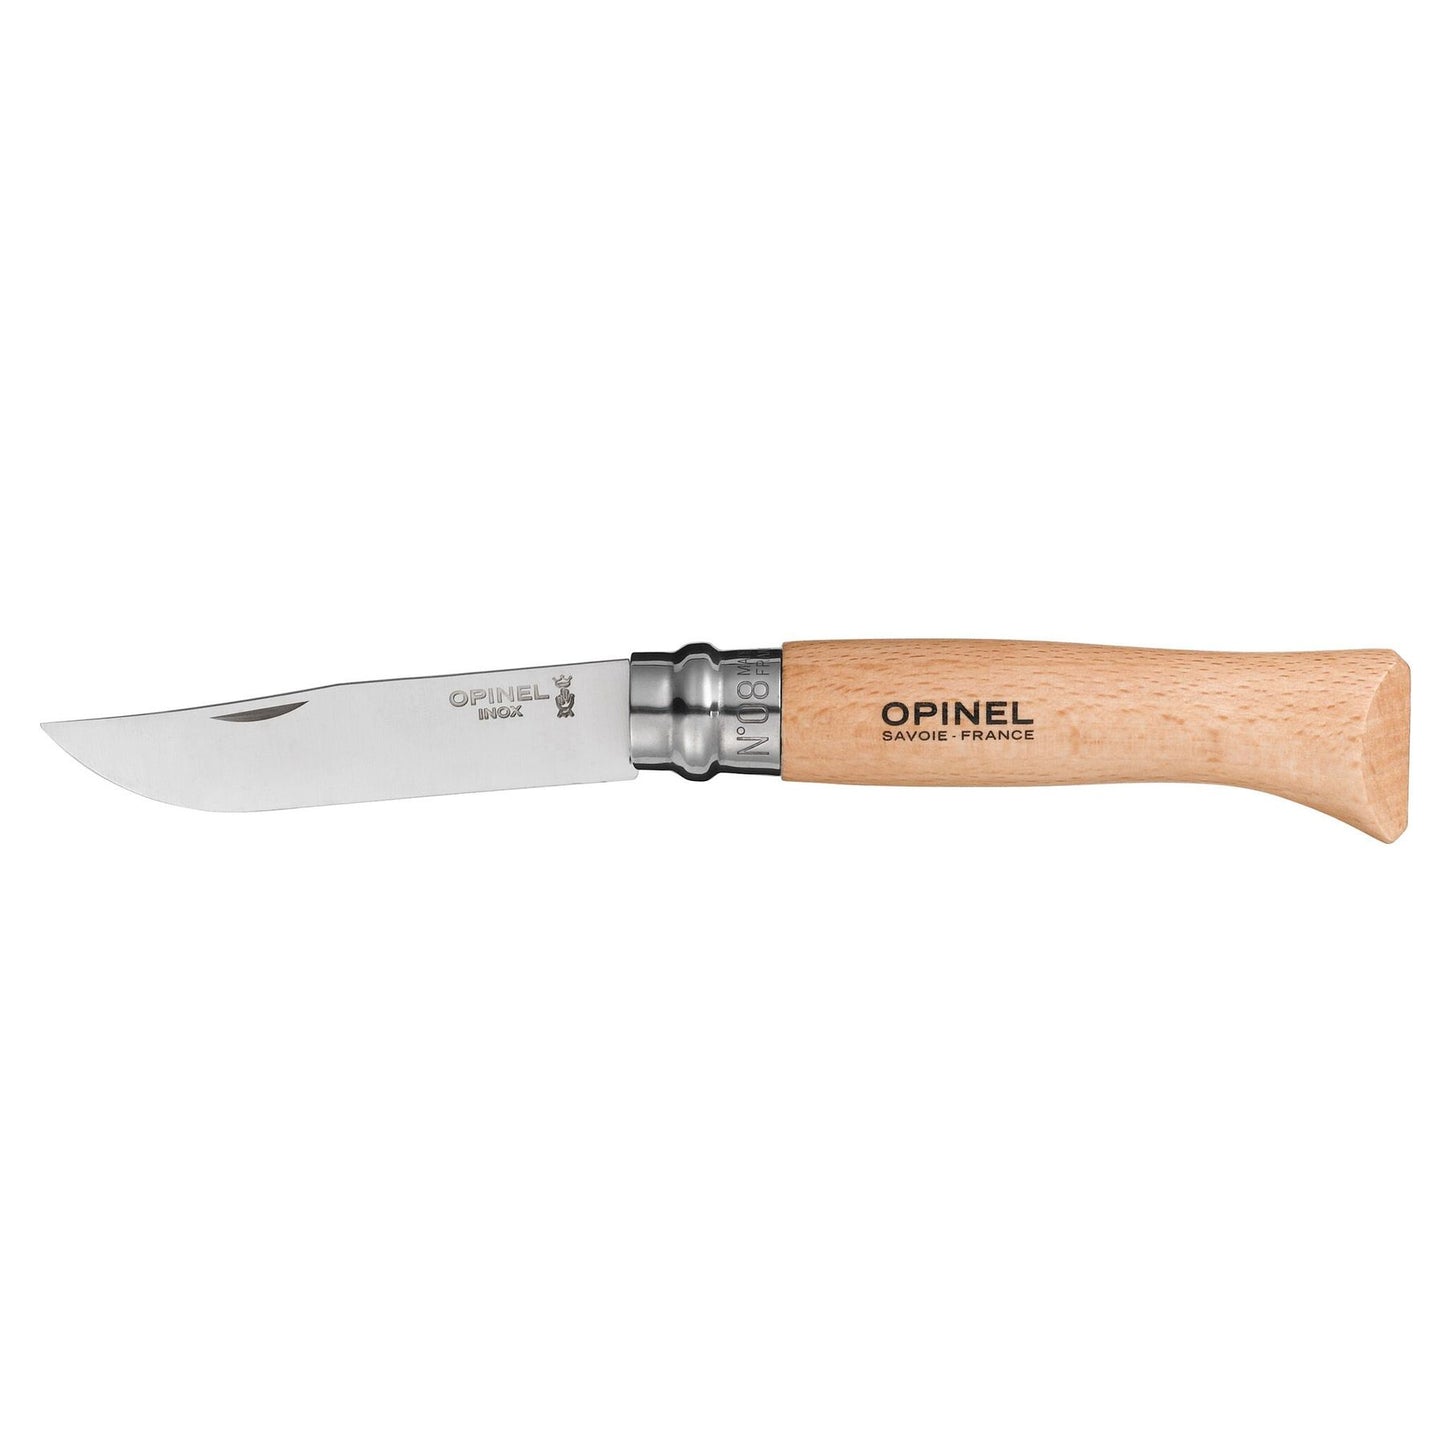 Opinel No. 8 Stainless folding